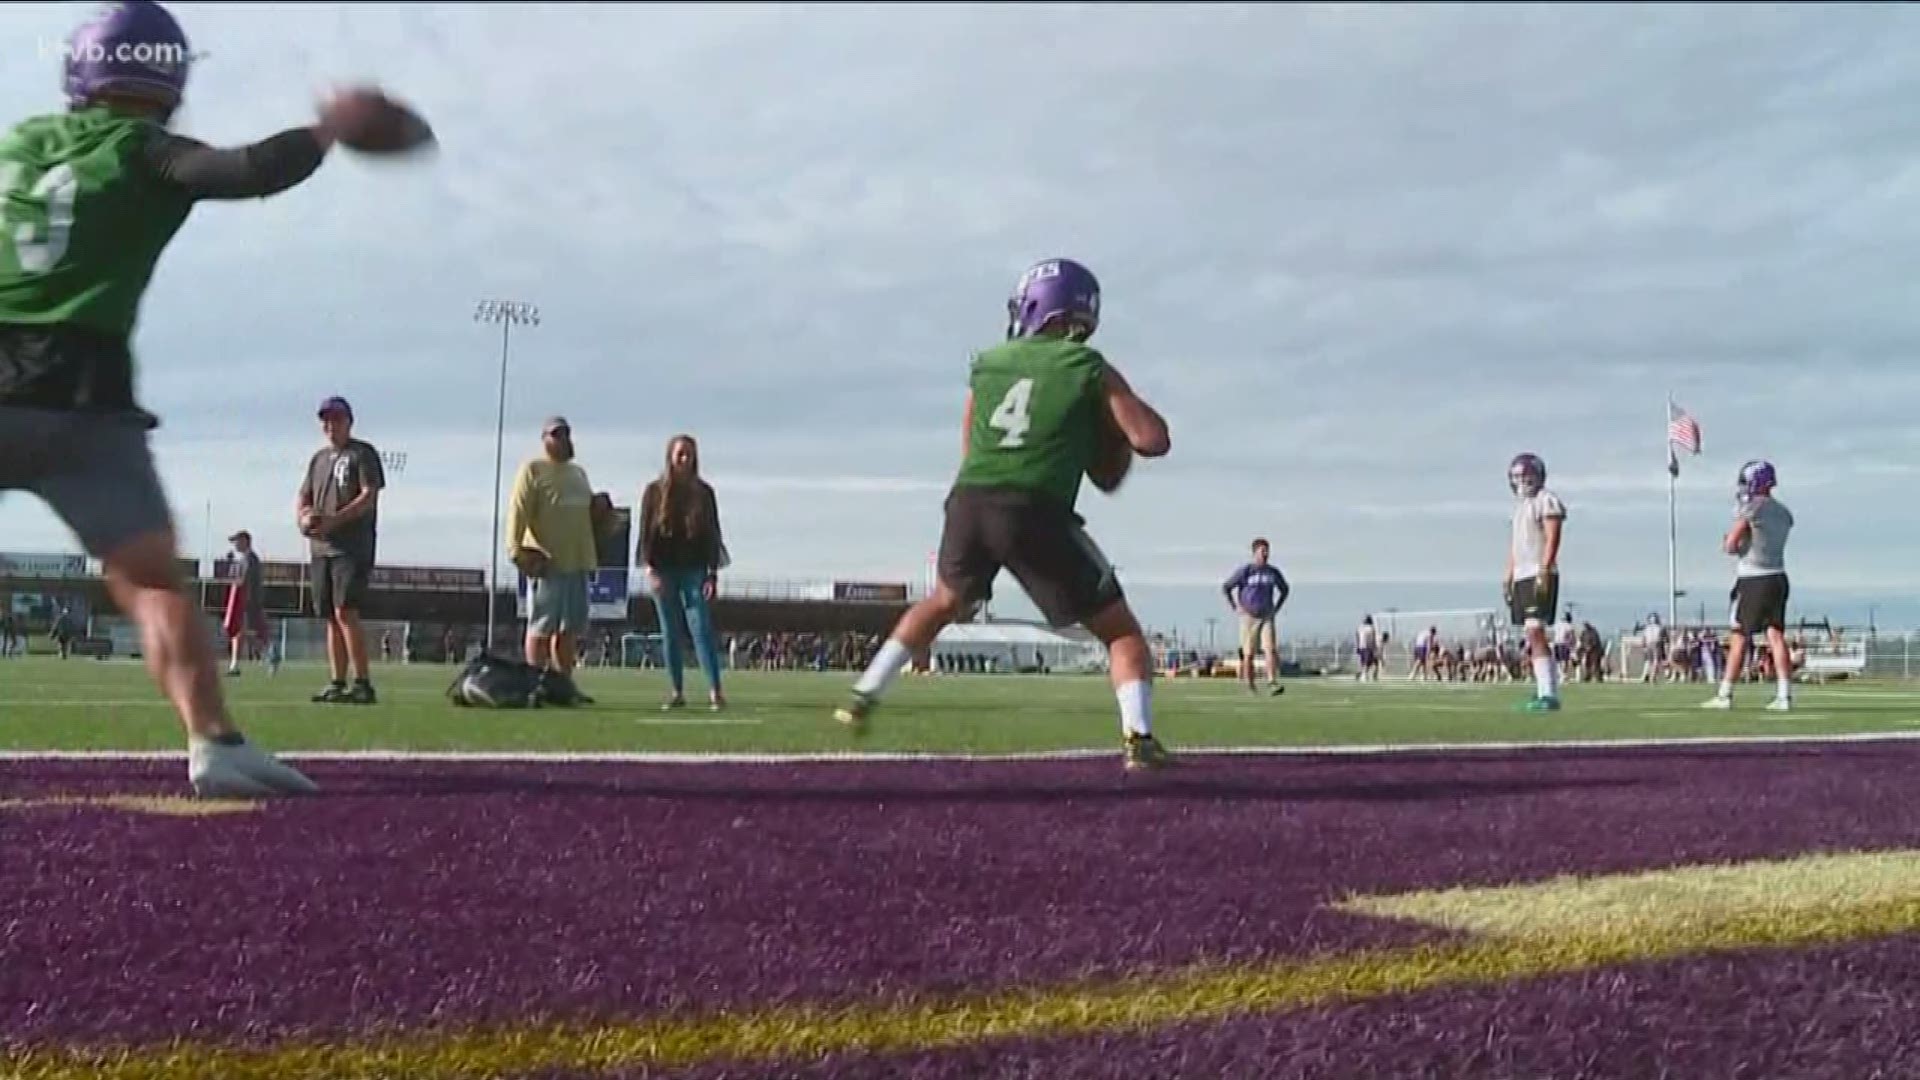 Before the Yotes' conference announced football would play in the spring, head coach Mike Moroski told KTVB